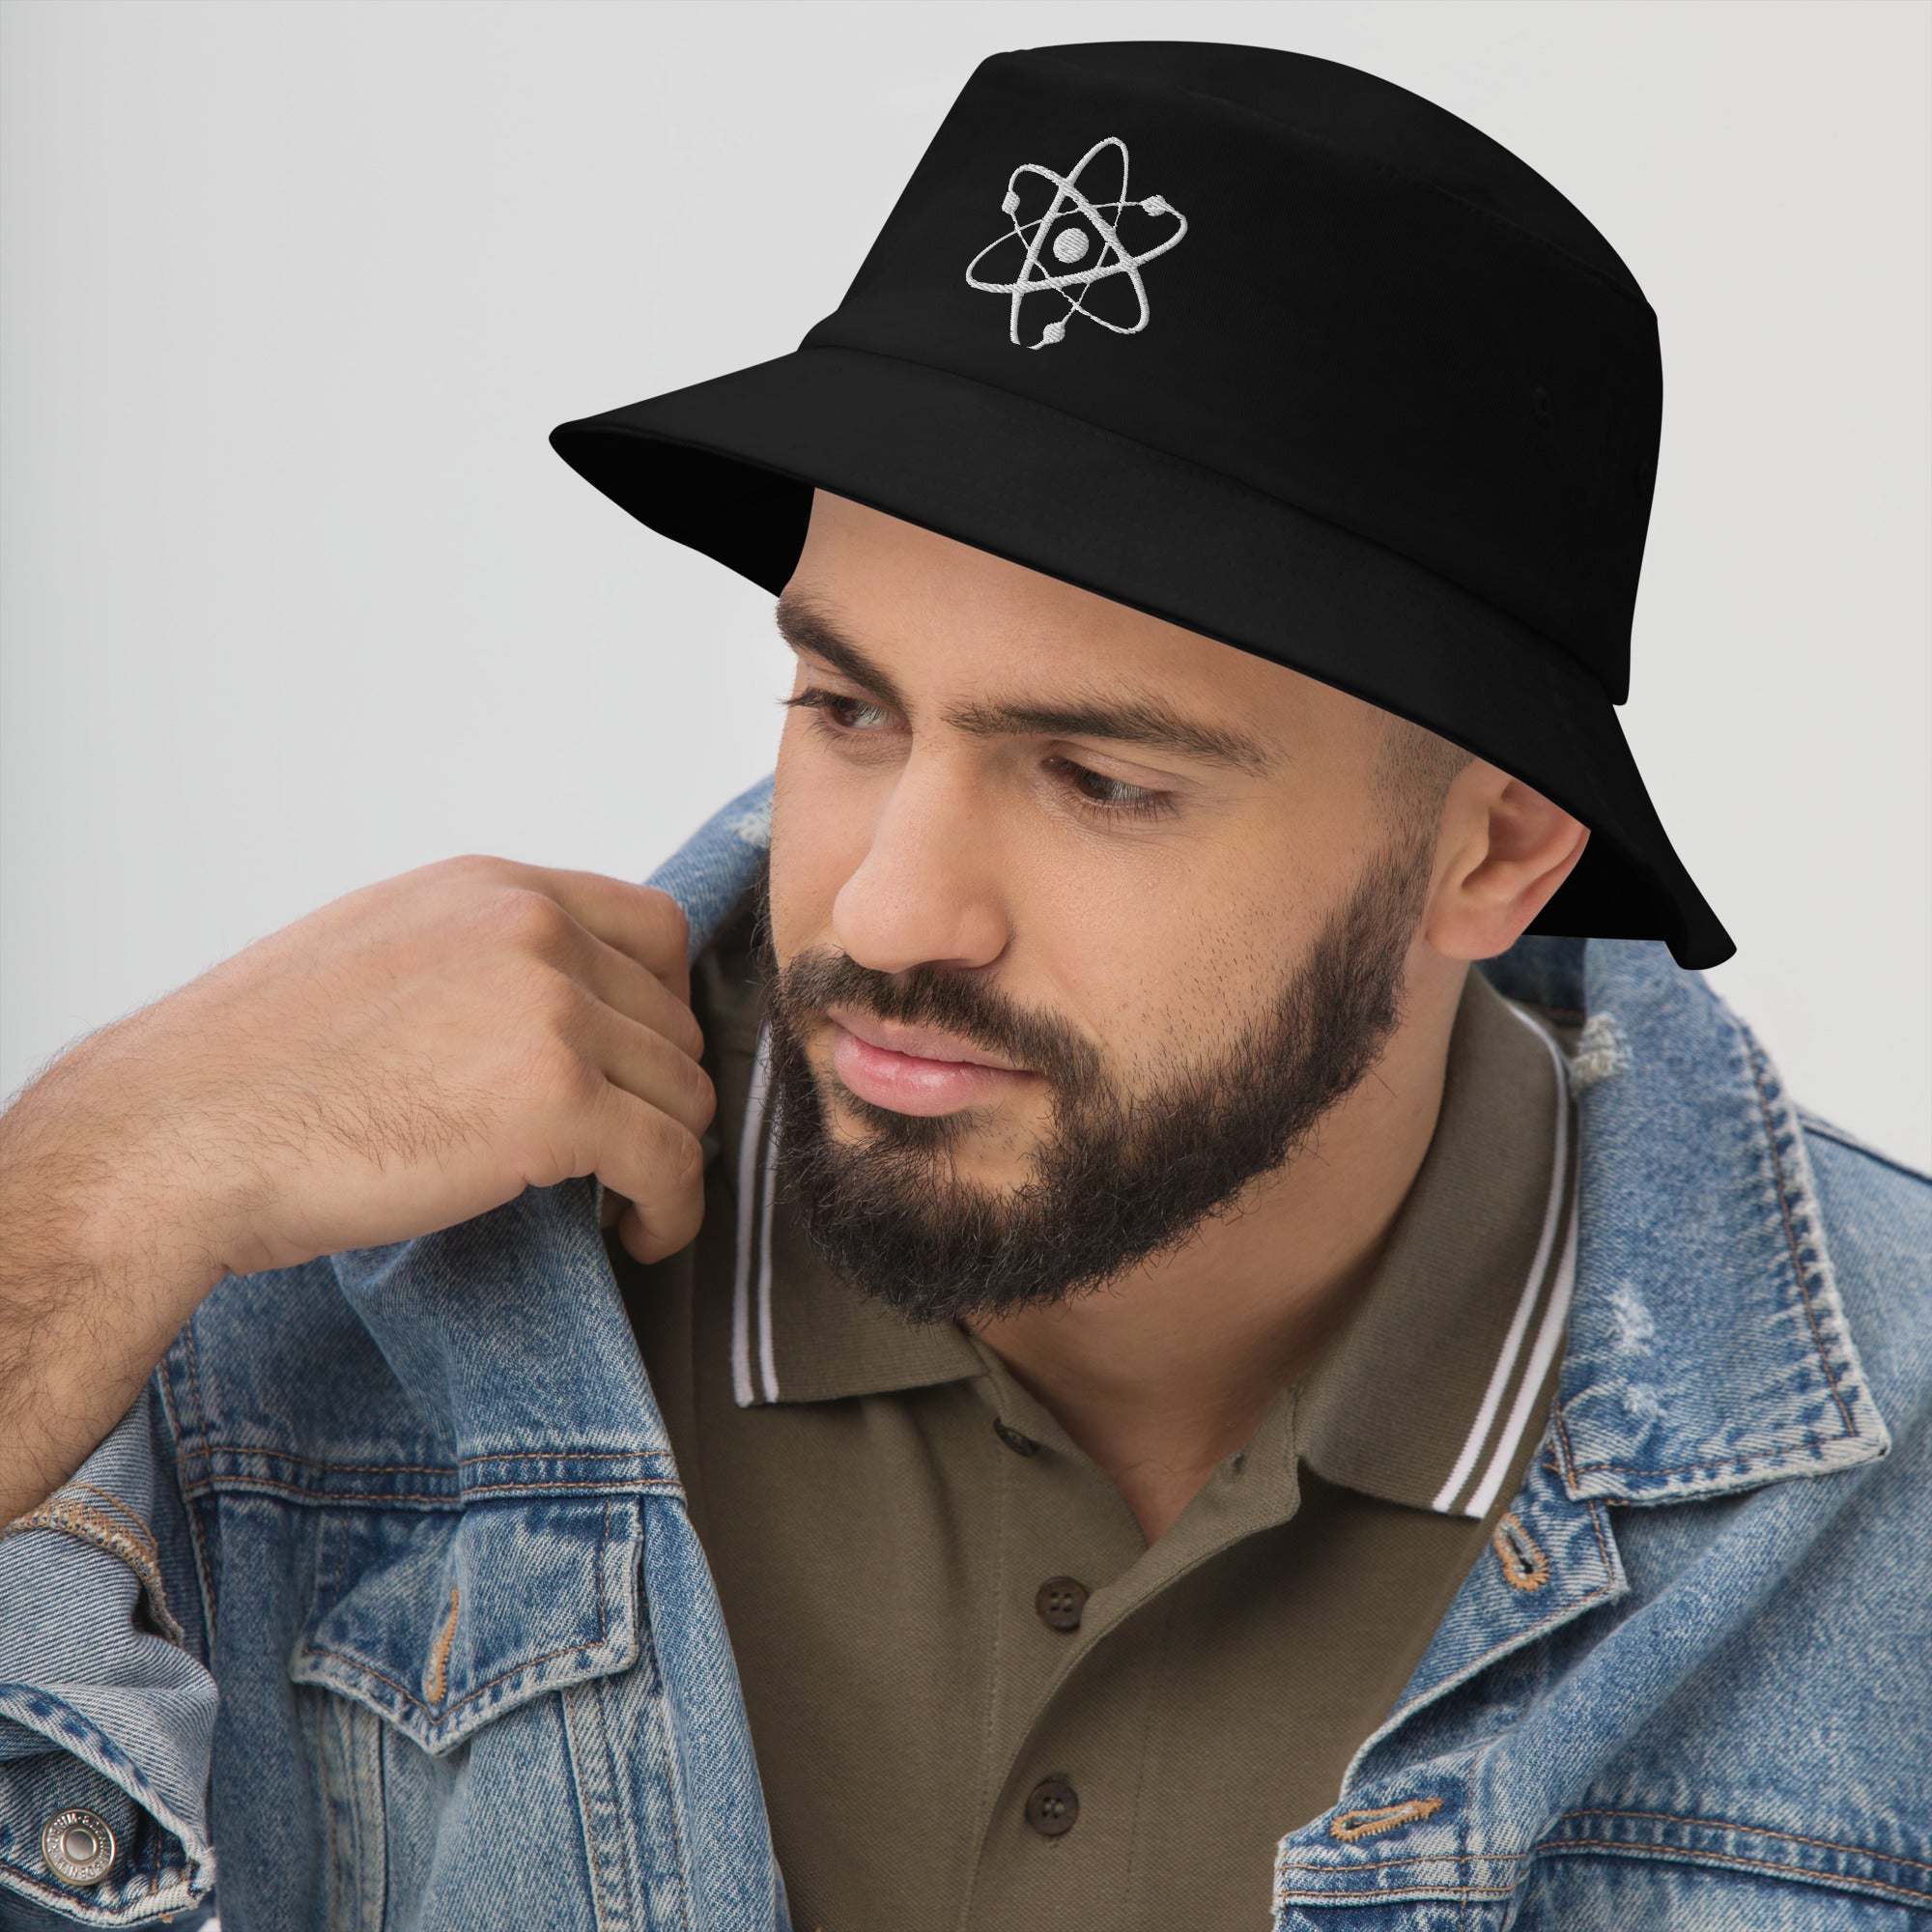 Atomic Nucleus Symbol Nuclear Power Embroidered Bucket Hat